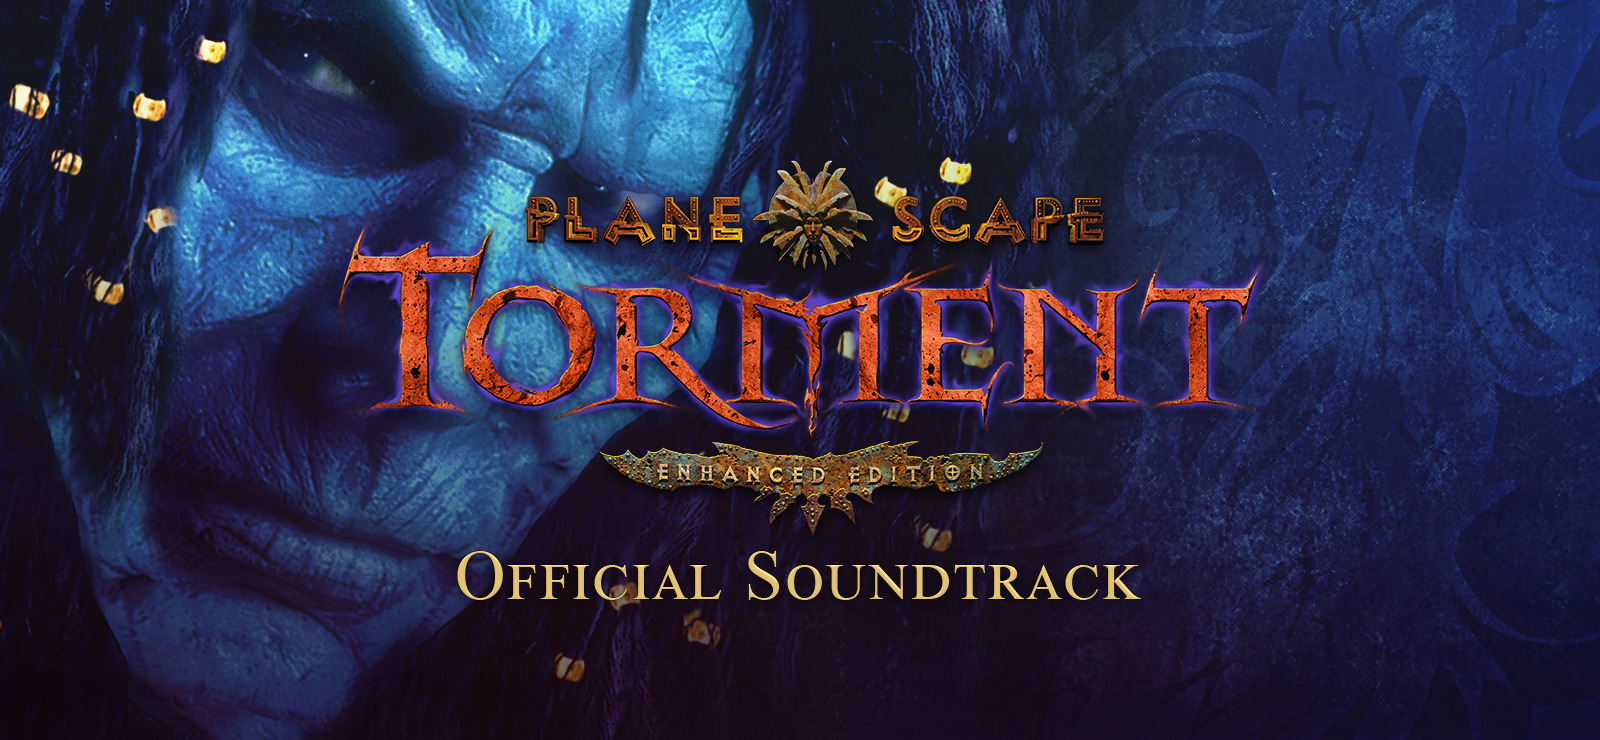 Planescape: Torment: Enhanced Edition Official Soundtrack on